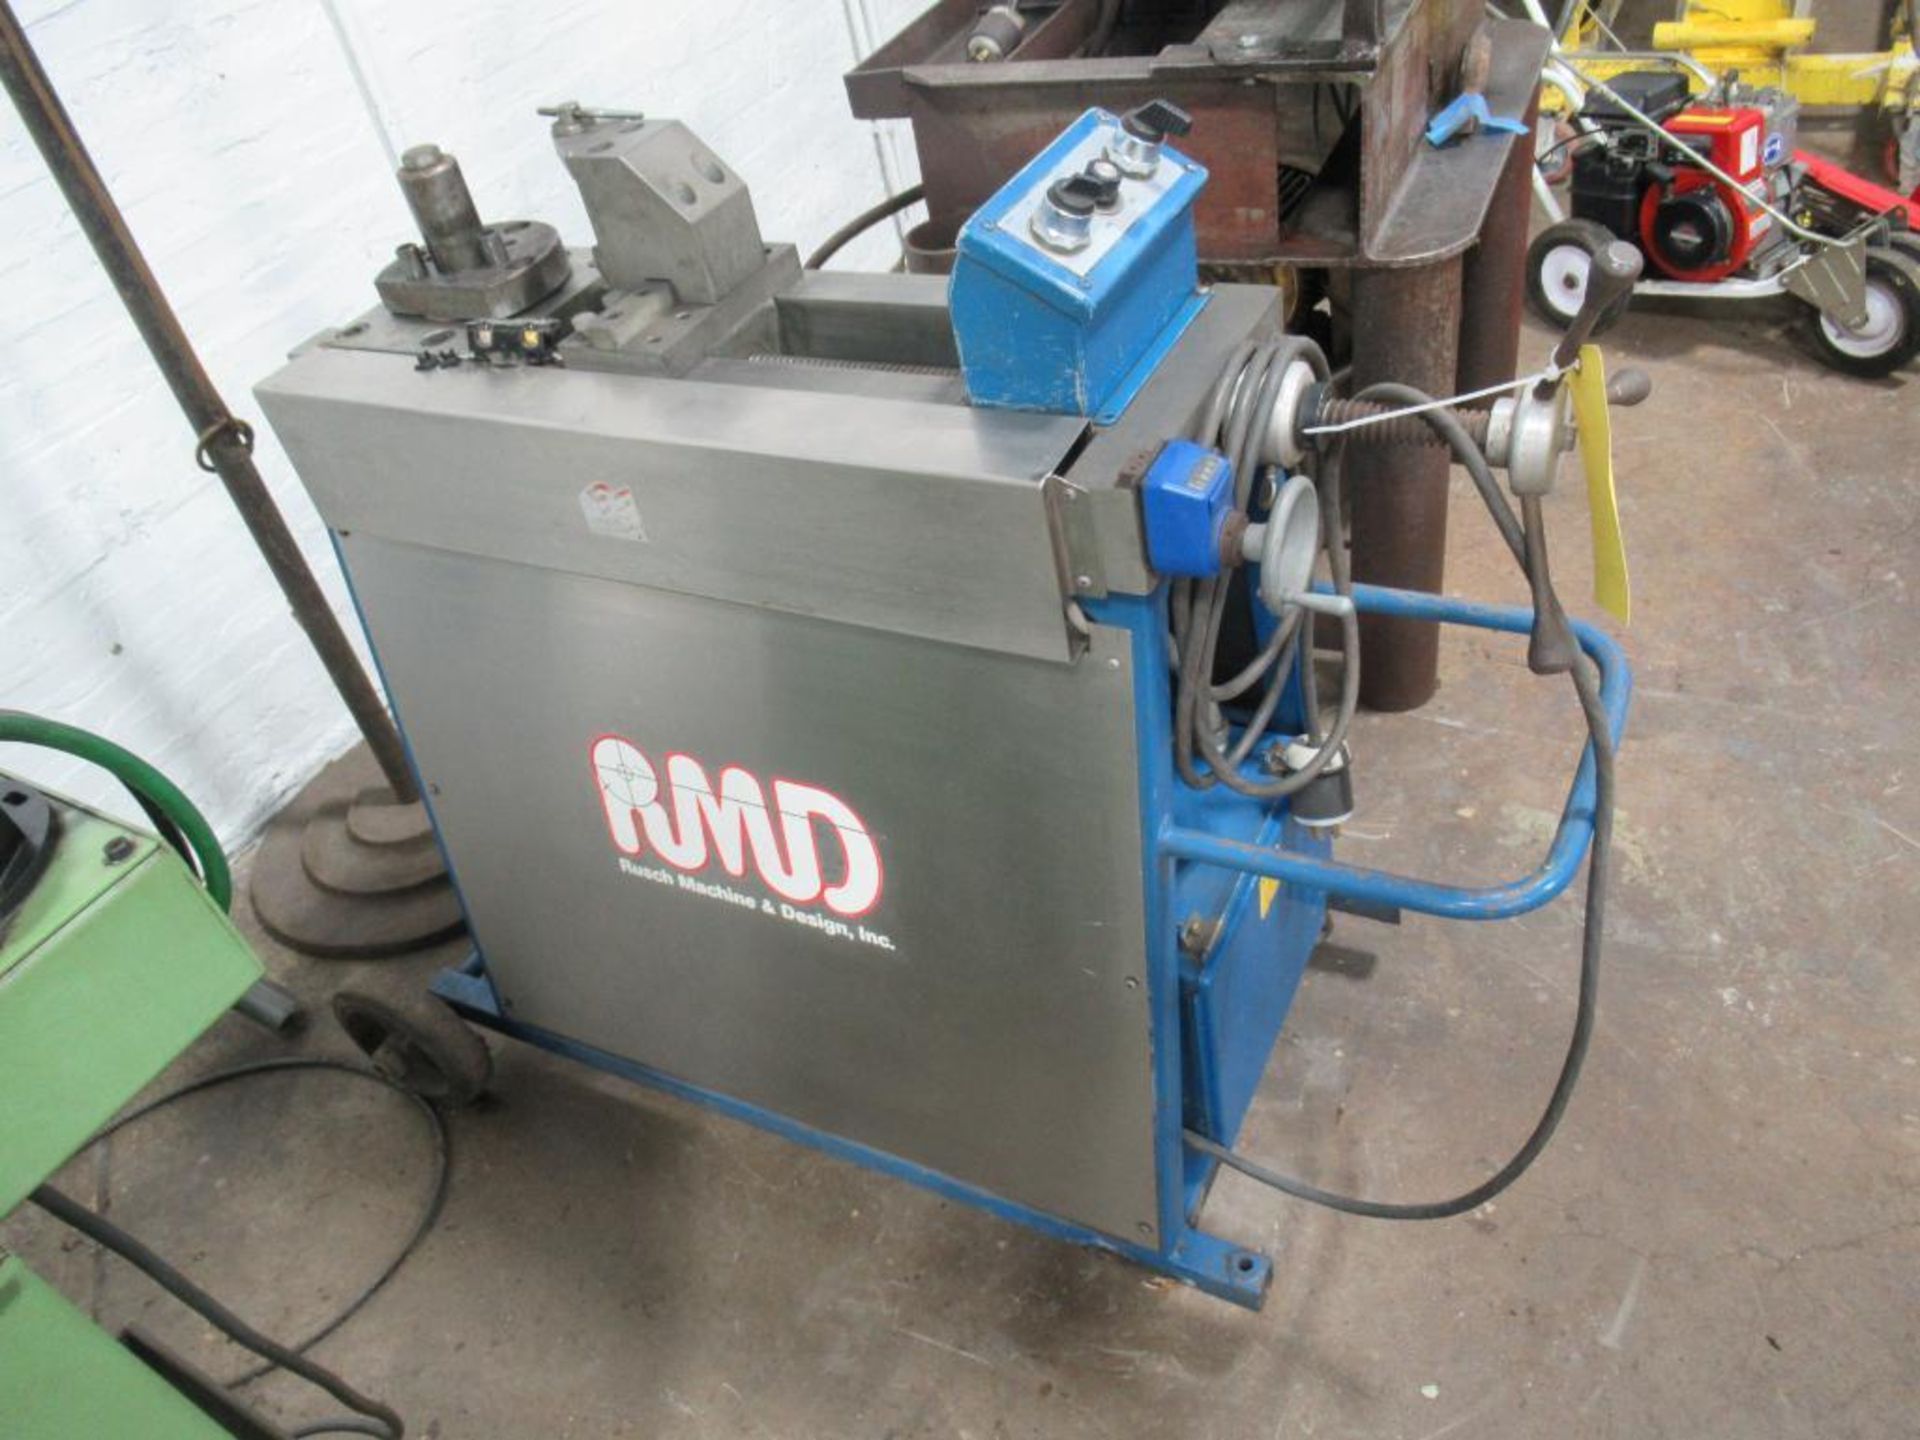 RMD 300 S Electric Rotary Draw Pipe and Tubing Bender, 220 Volt, S/N 200 - Image 2 of 4